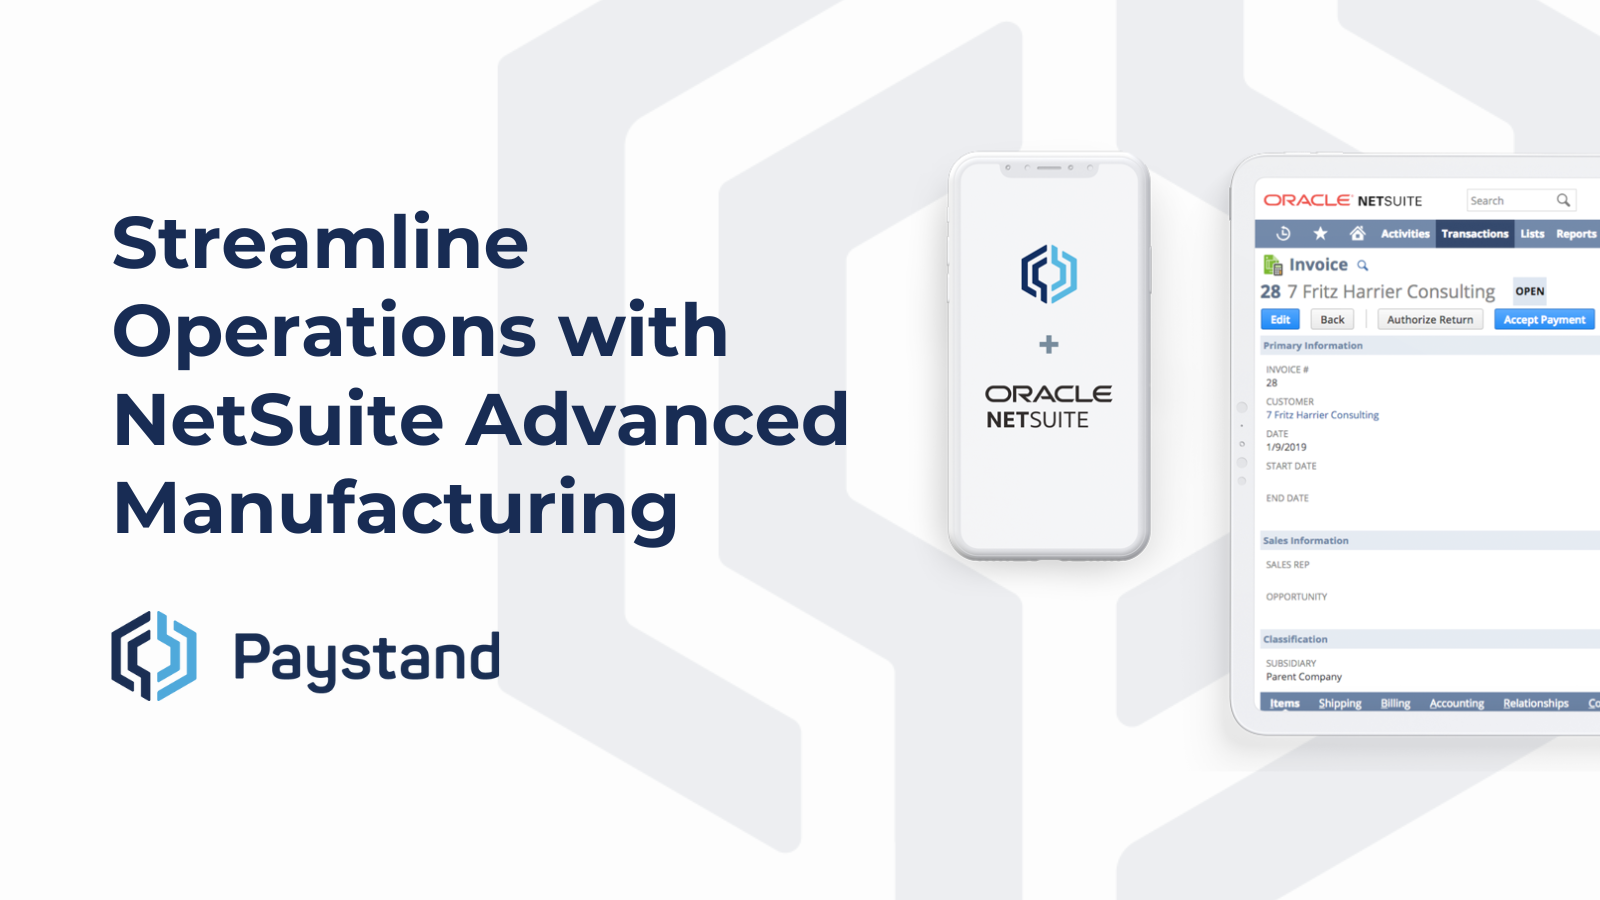 Streamline Operations with NetSuite Advanced Manufacturing